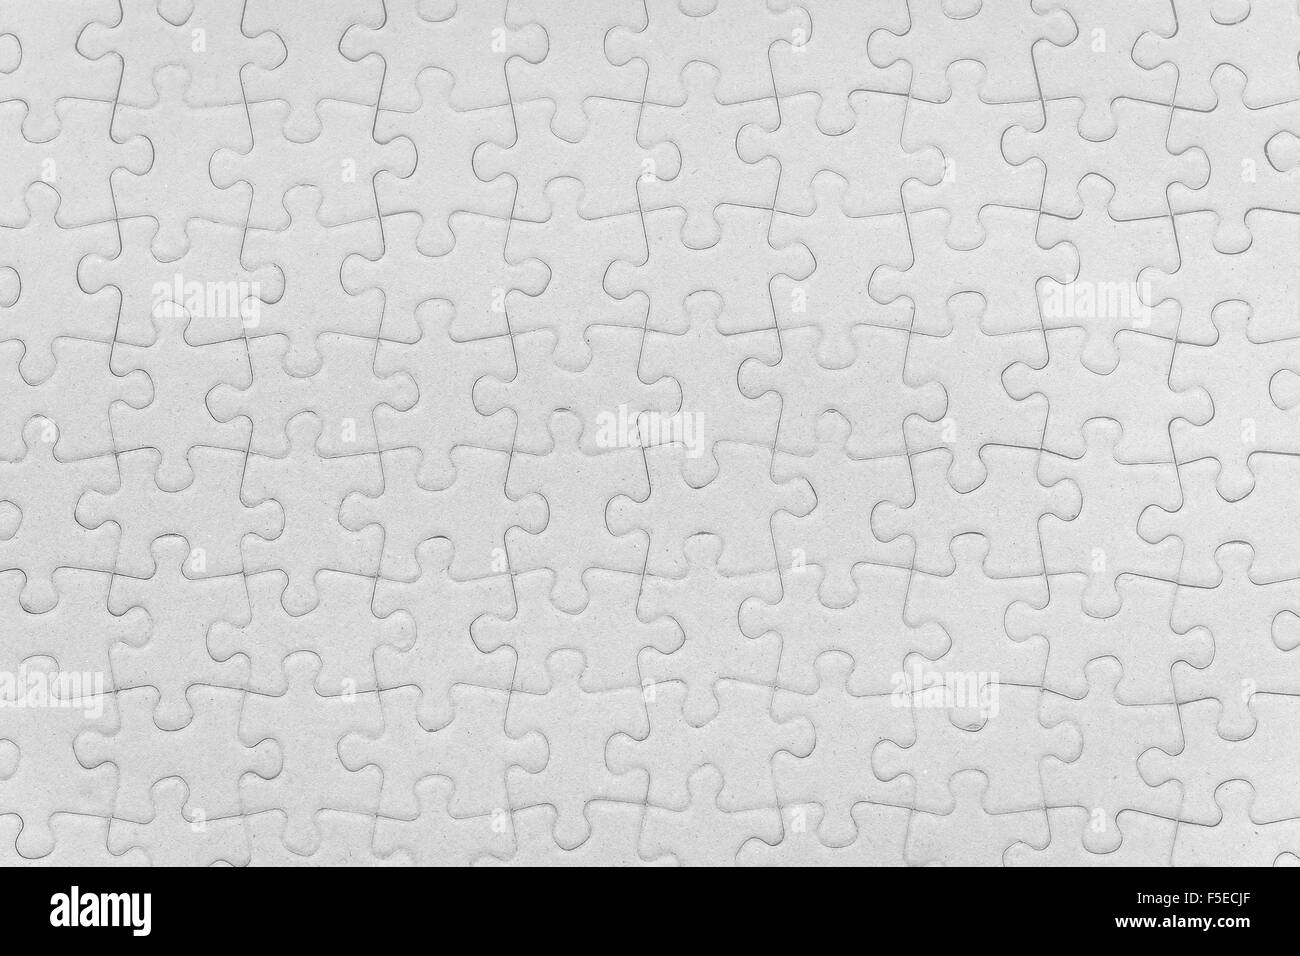 complete jigsaw puzzle background texture Stock Photo